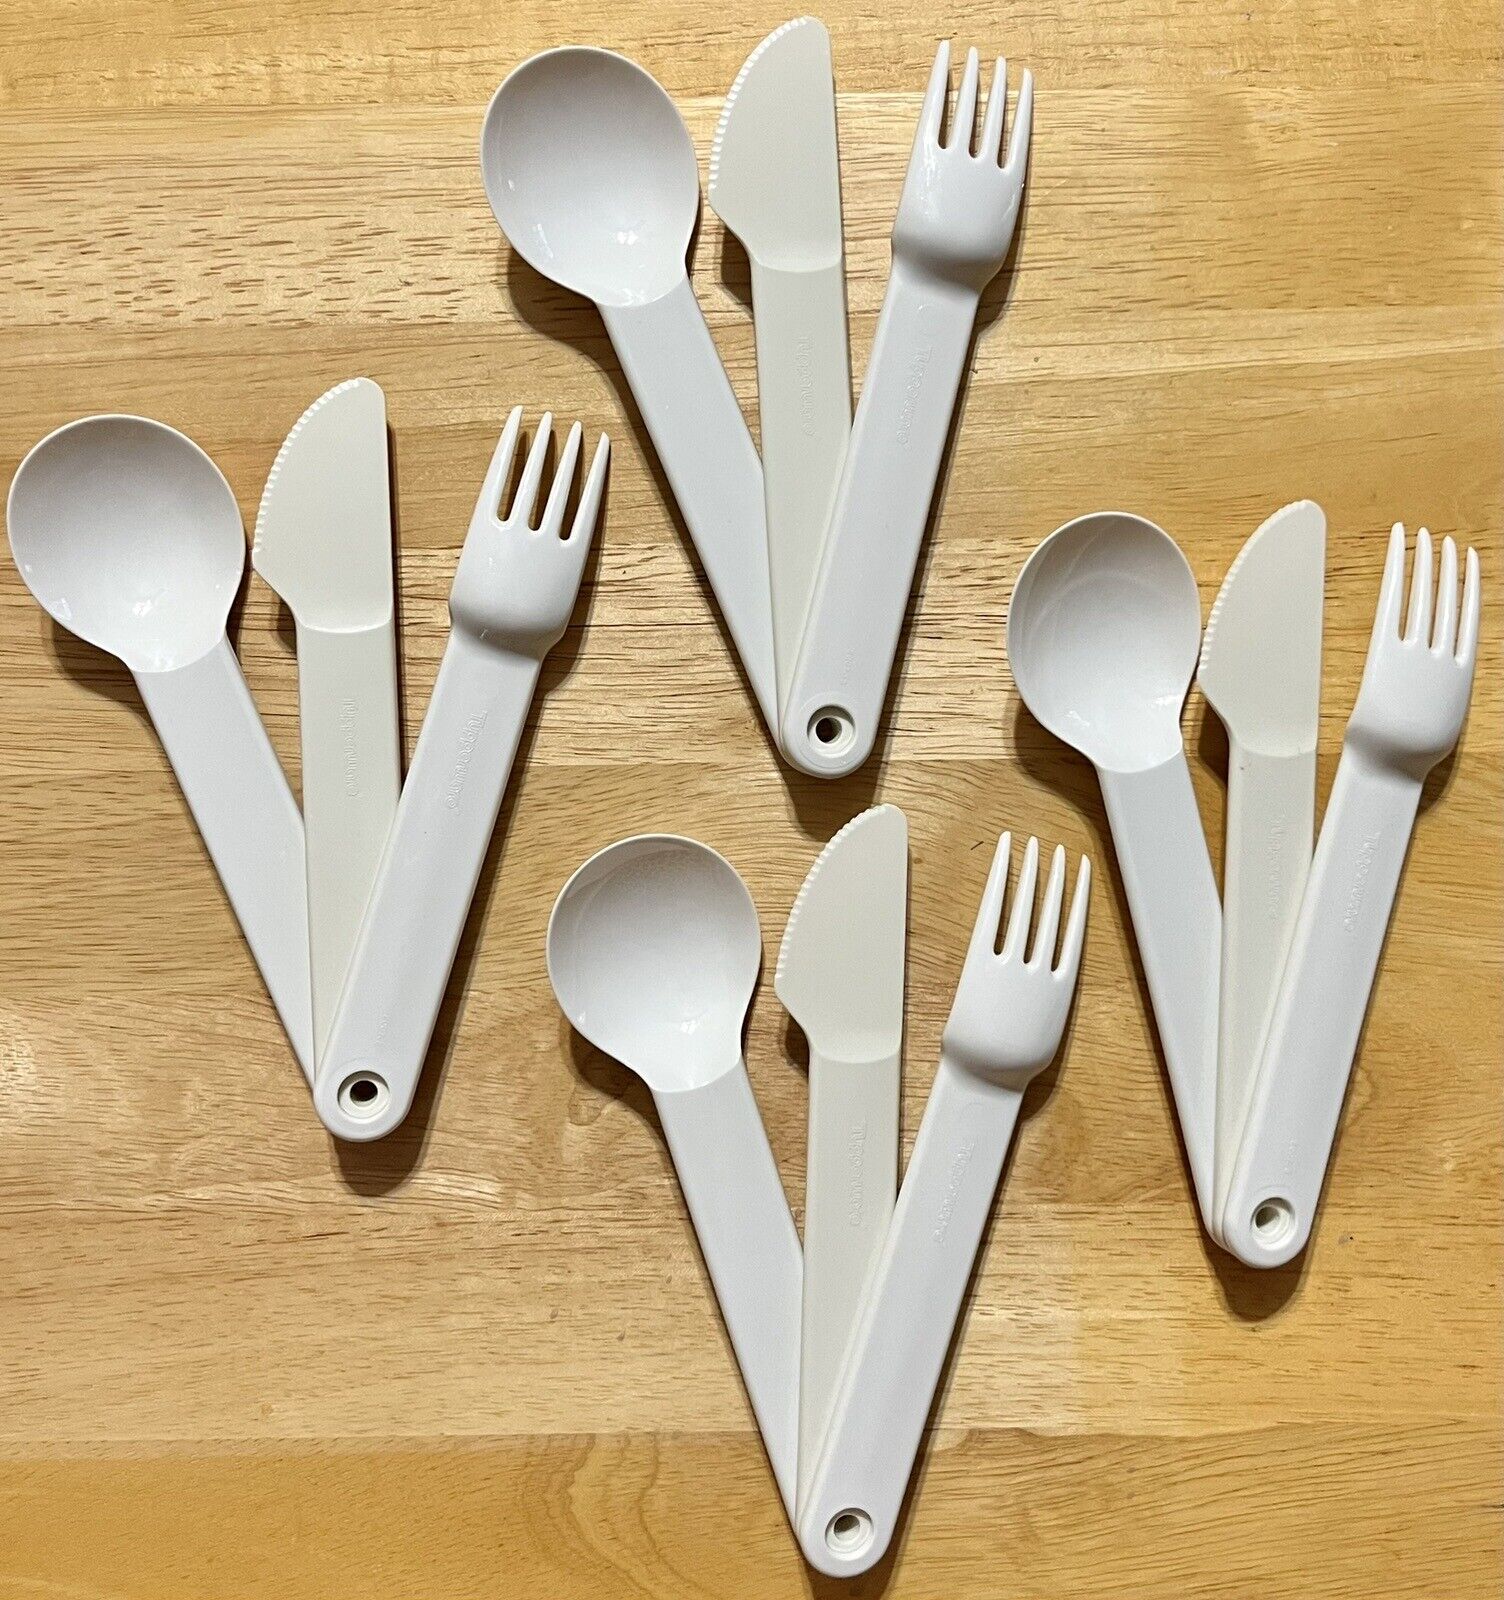 NEW RARE Tupperware On The Go Snap Together Utensils Fork Knife Spoon Set Of 4